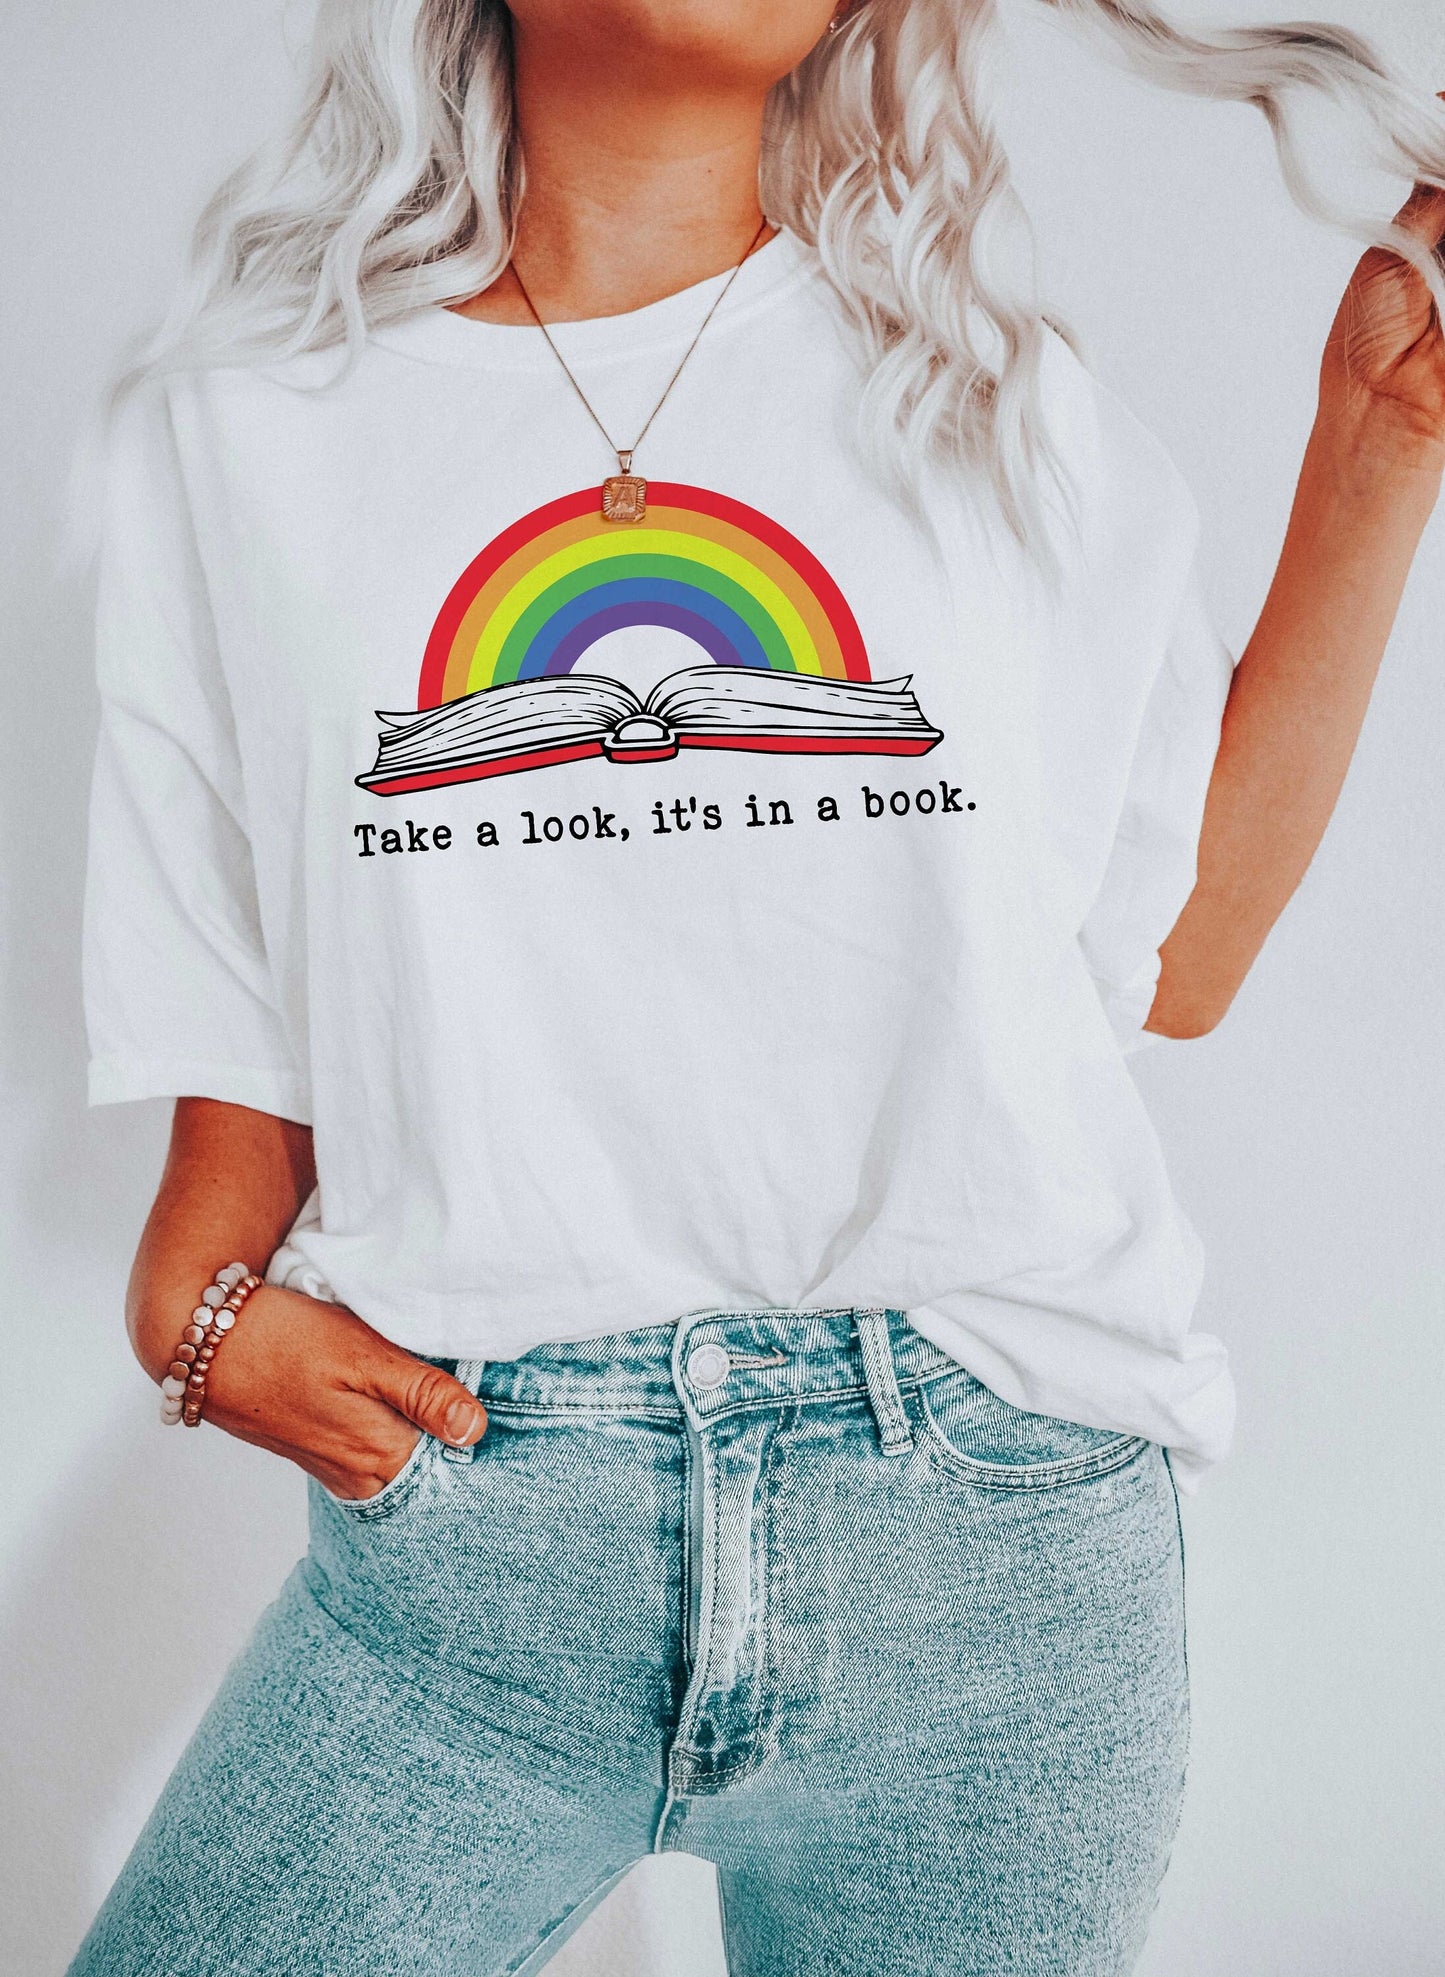 Take A Look It's In A Book, Reading, School Book Parody Graphic Tee (Unisex Bella Canvas for Women / Men)